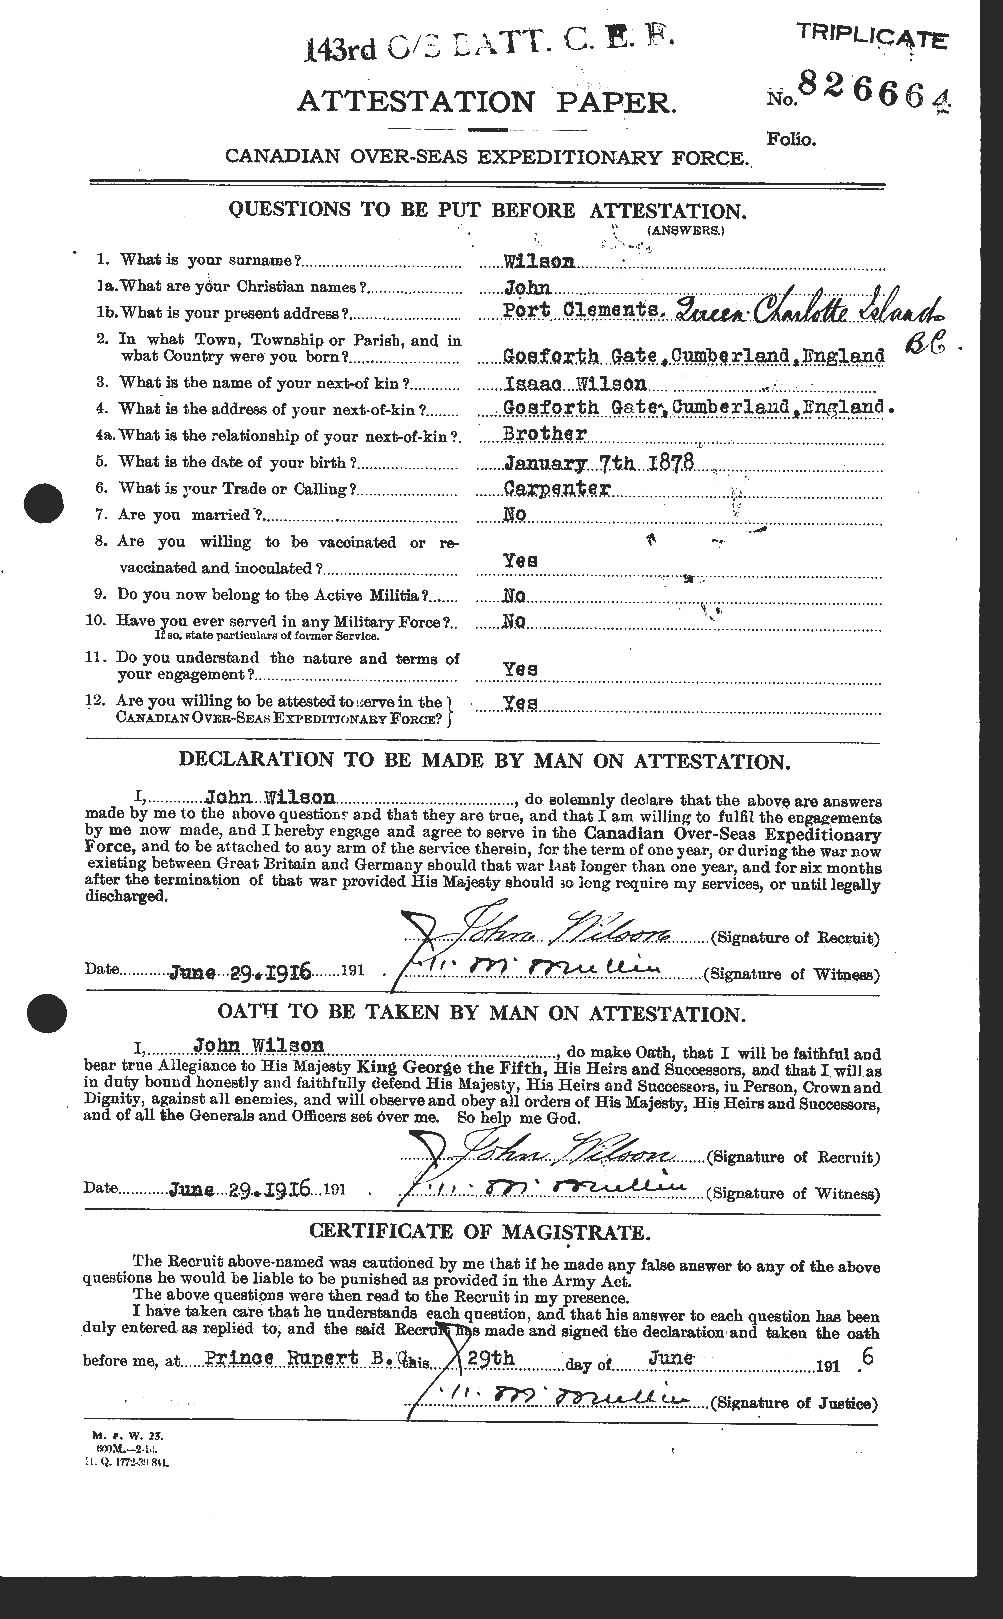 Personnel Records of the First World War - CEF 681555a